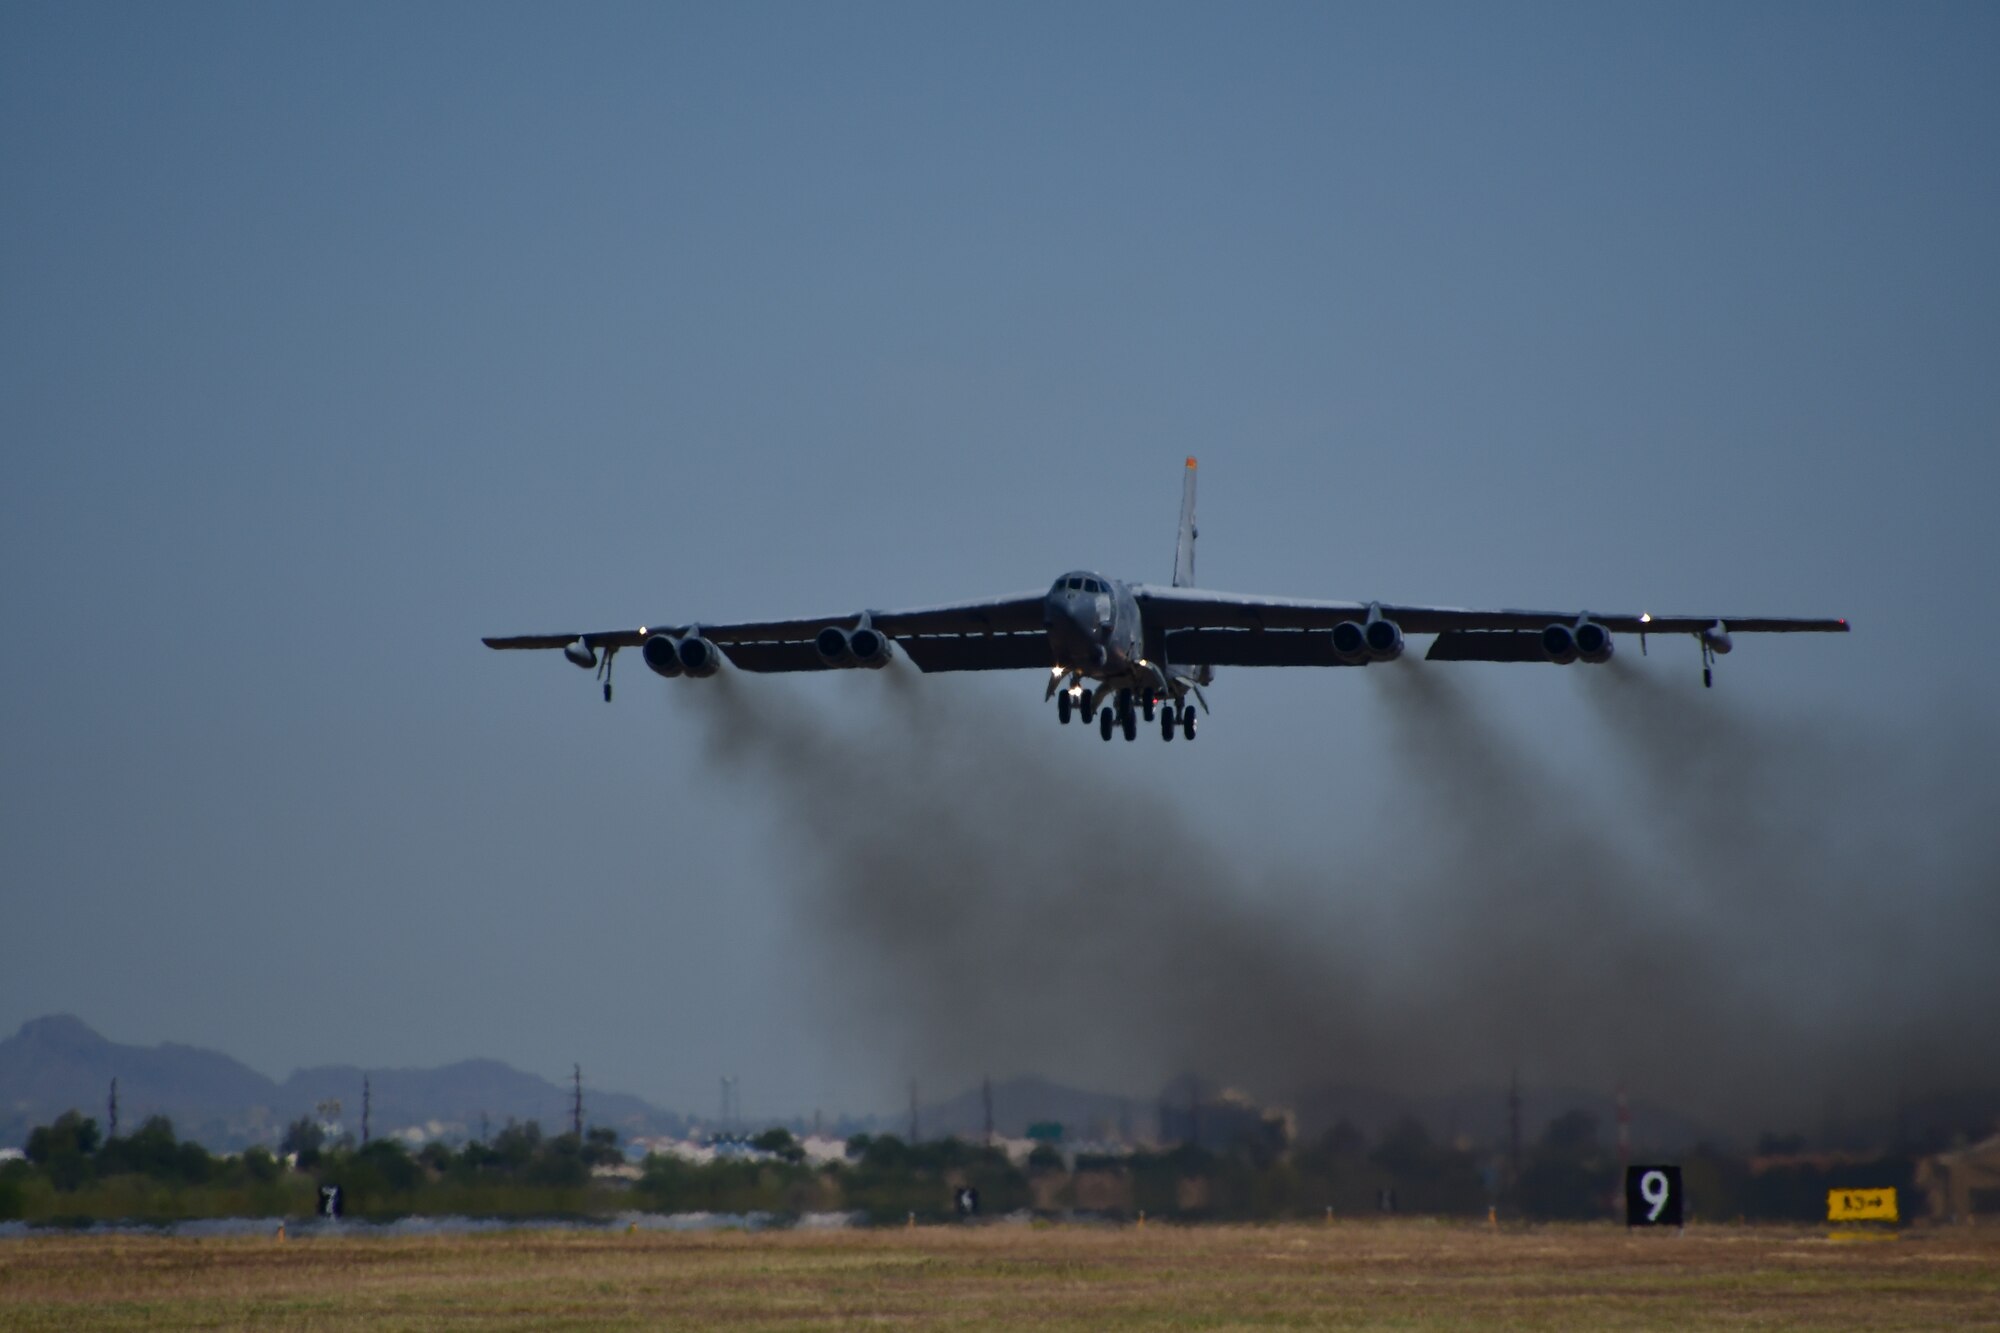 The B-52H completed phase one of its regeneration process at the 309th Aerospace Maintenance and Regeneration Group. It is scheduled to complete its phase depot maintenance in February of 2021 as a completely restored, fleet configured B-52H.